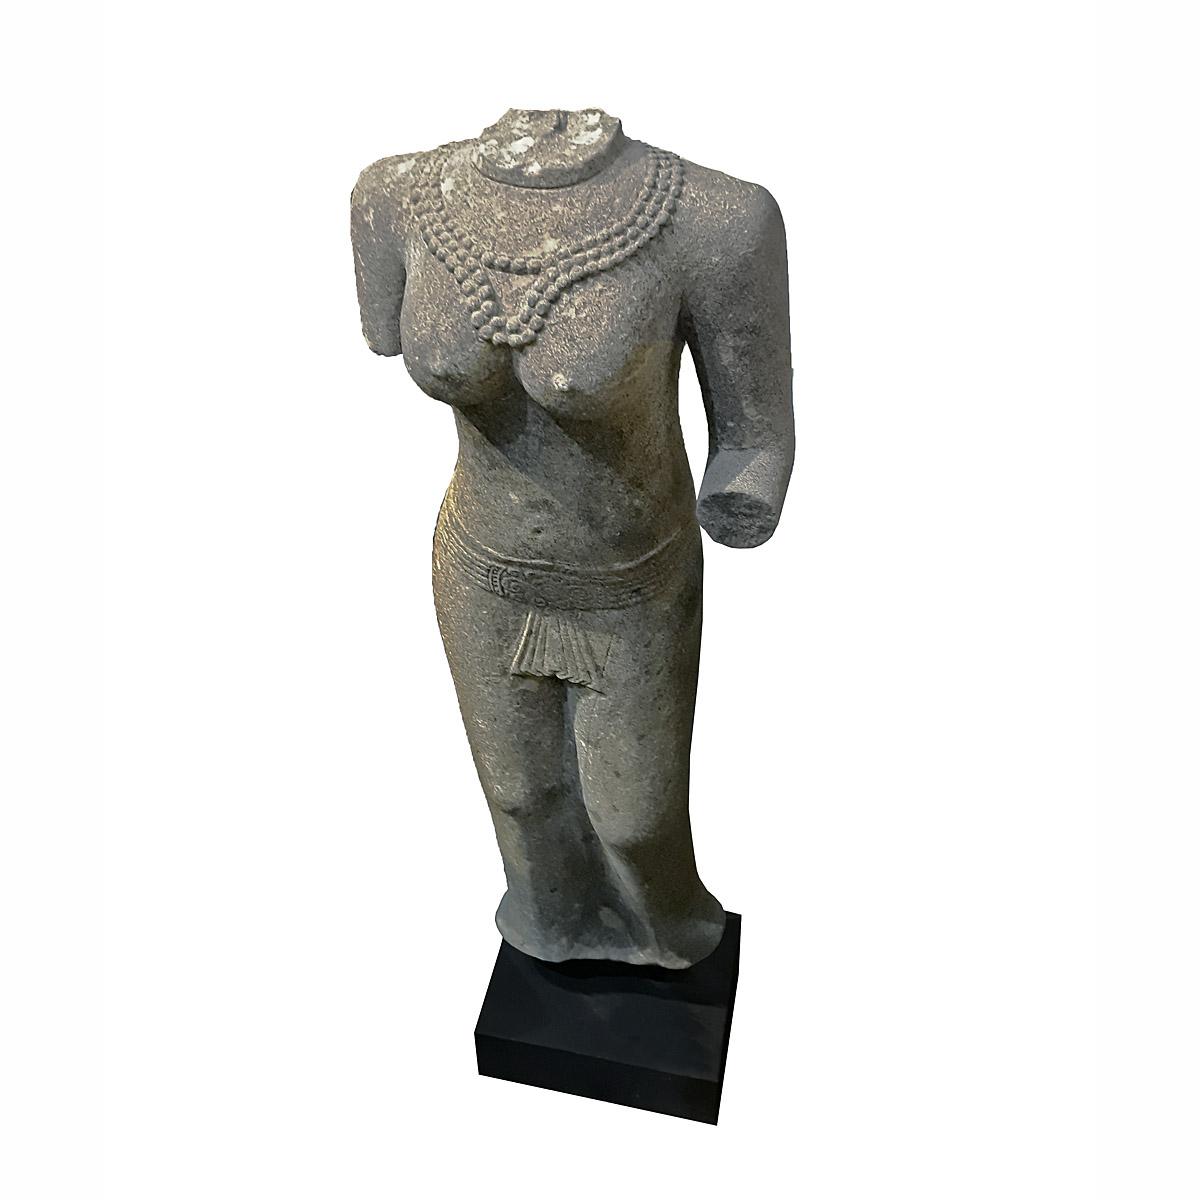 A hand-carved sandstone torso of woman, inspired on the traditional decorations of Thai ancient temples. At 47 inches high, it stands as an attractive outdoor element, or as an indoor eye-catching accessory  

Mounted on a black wood and metal base. 